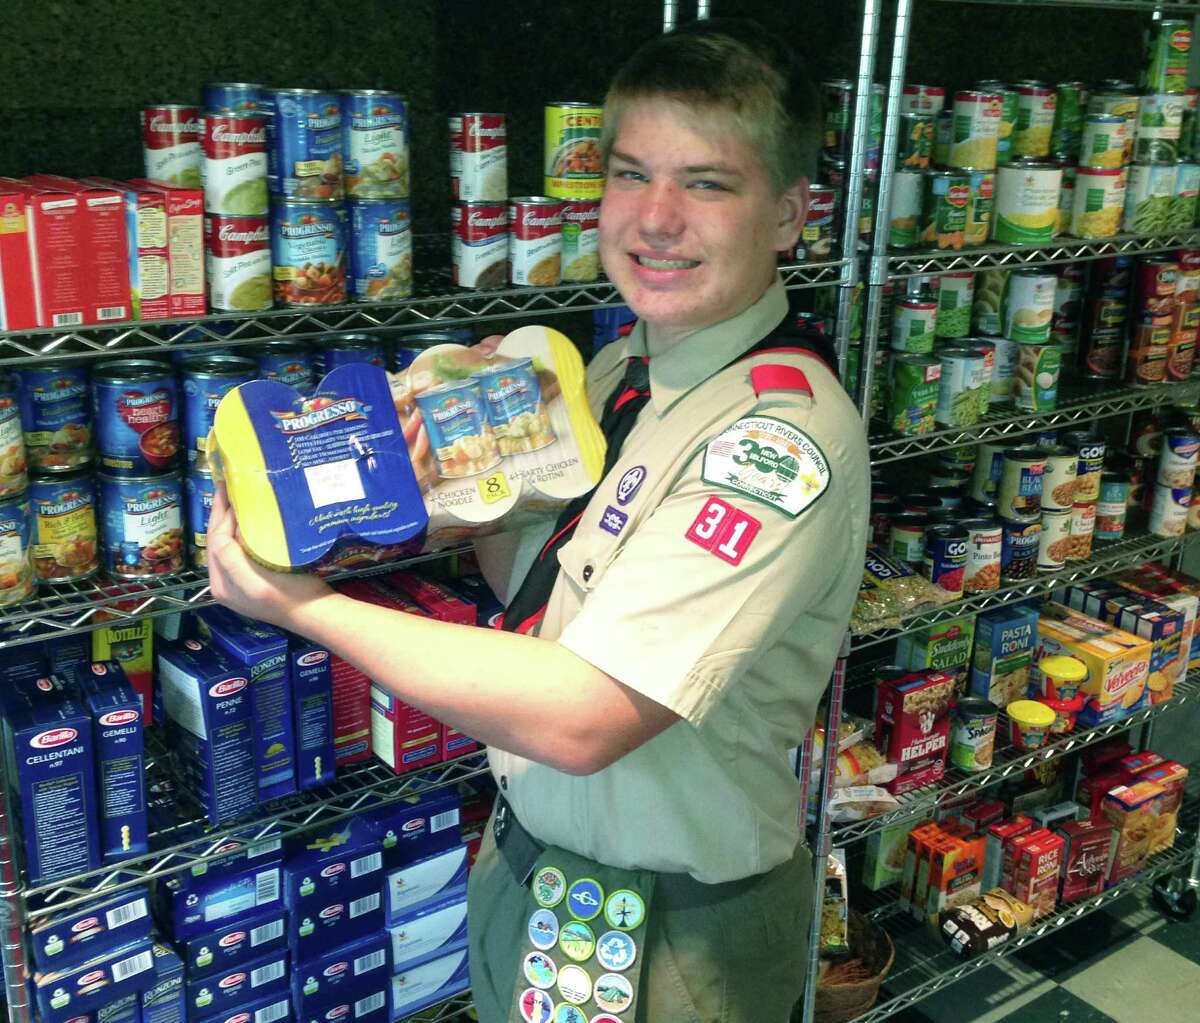 Eagle Scout Pete Kivela of New Milford poses for a keepsake photo in the relocated food pantry at Bridgewater Congregational Church. For more photos, visit www.newmilfordspectrum.com. 2014 Courtesy of the Kivela family